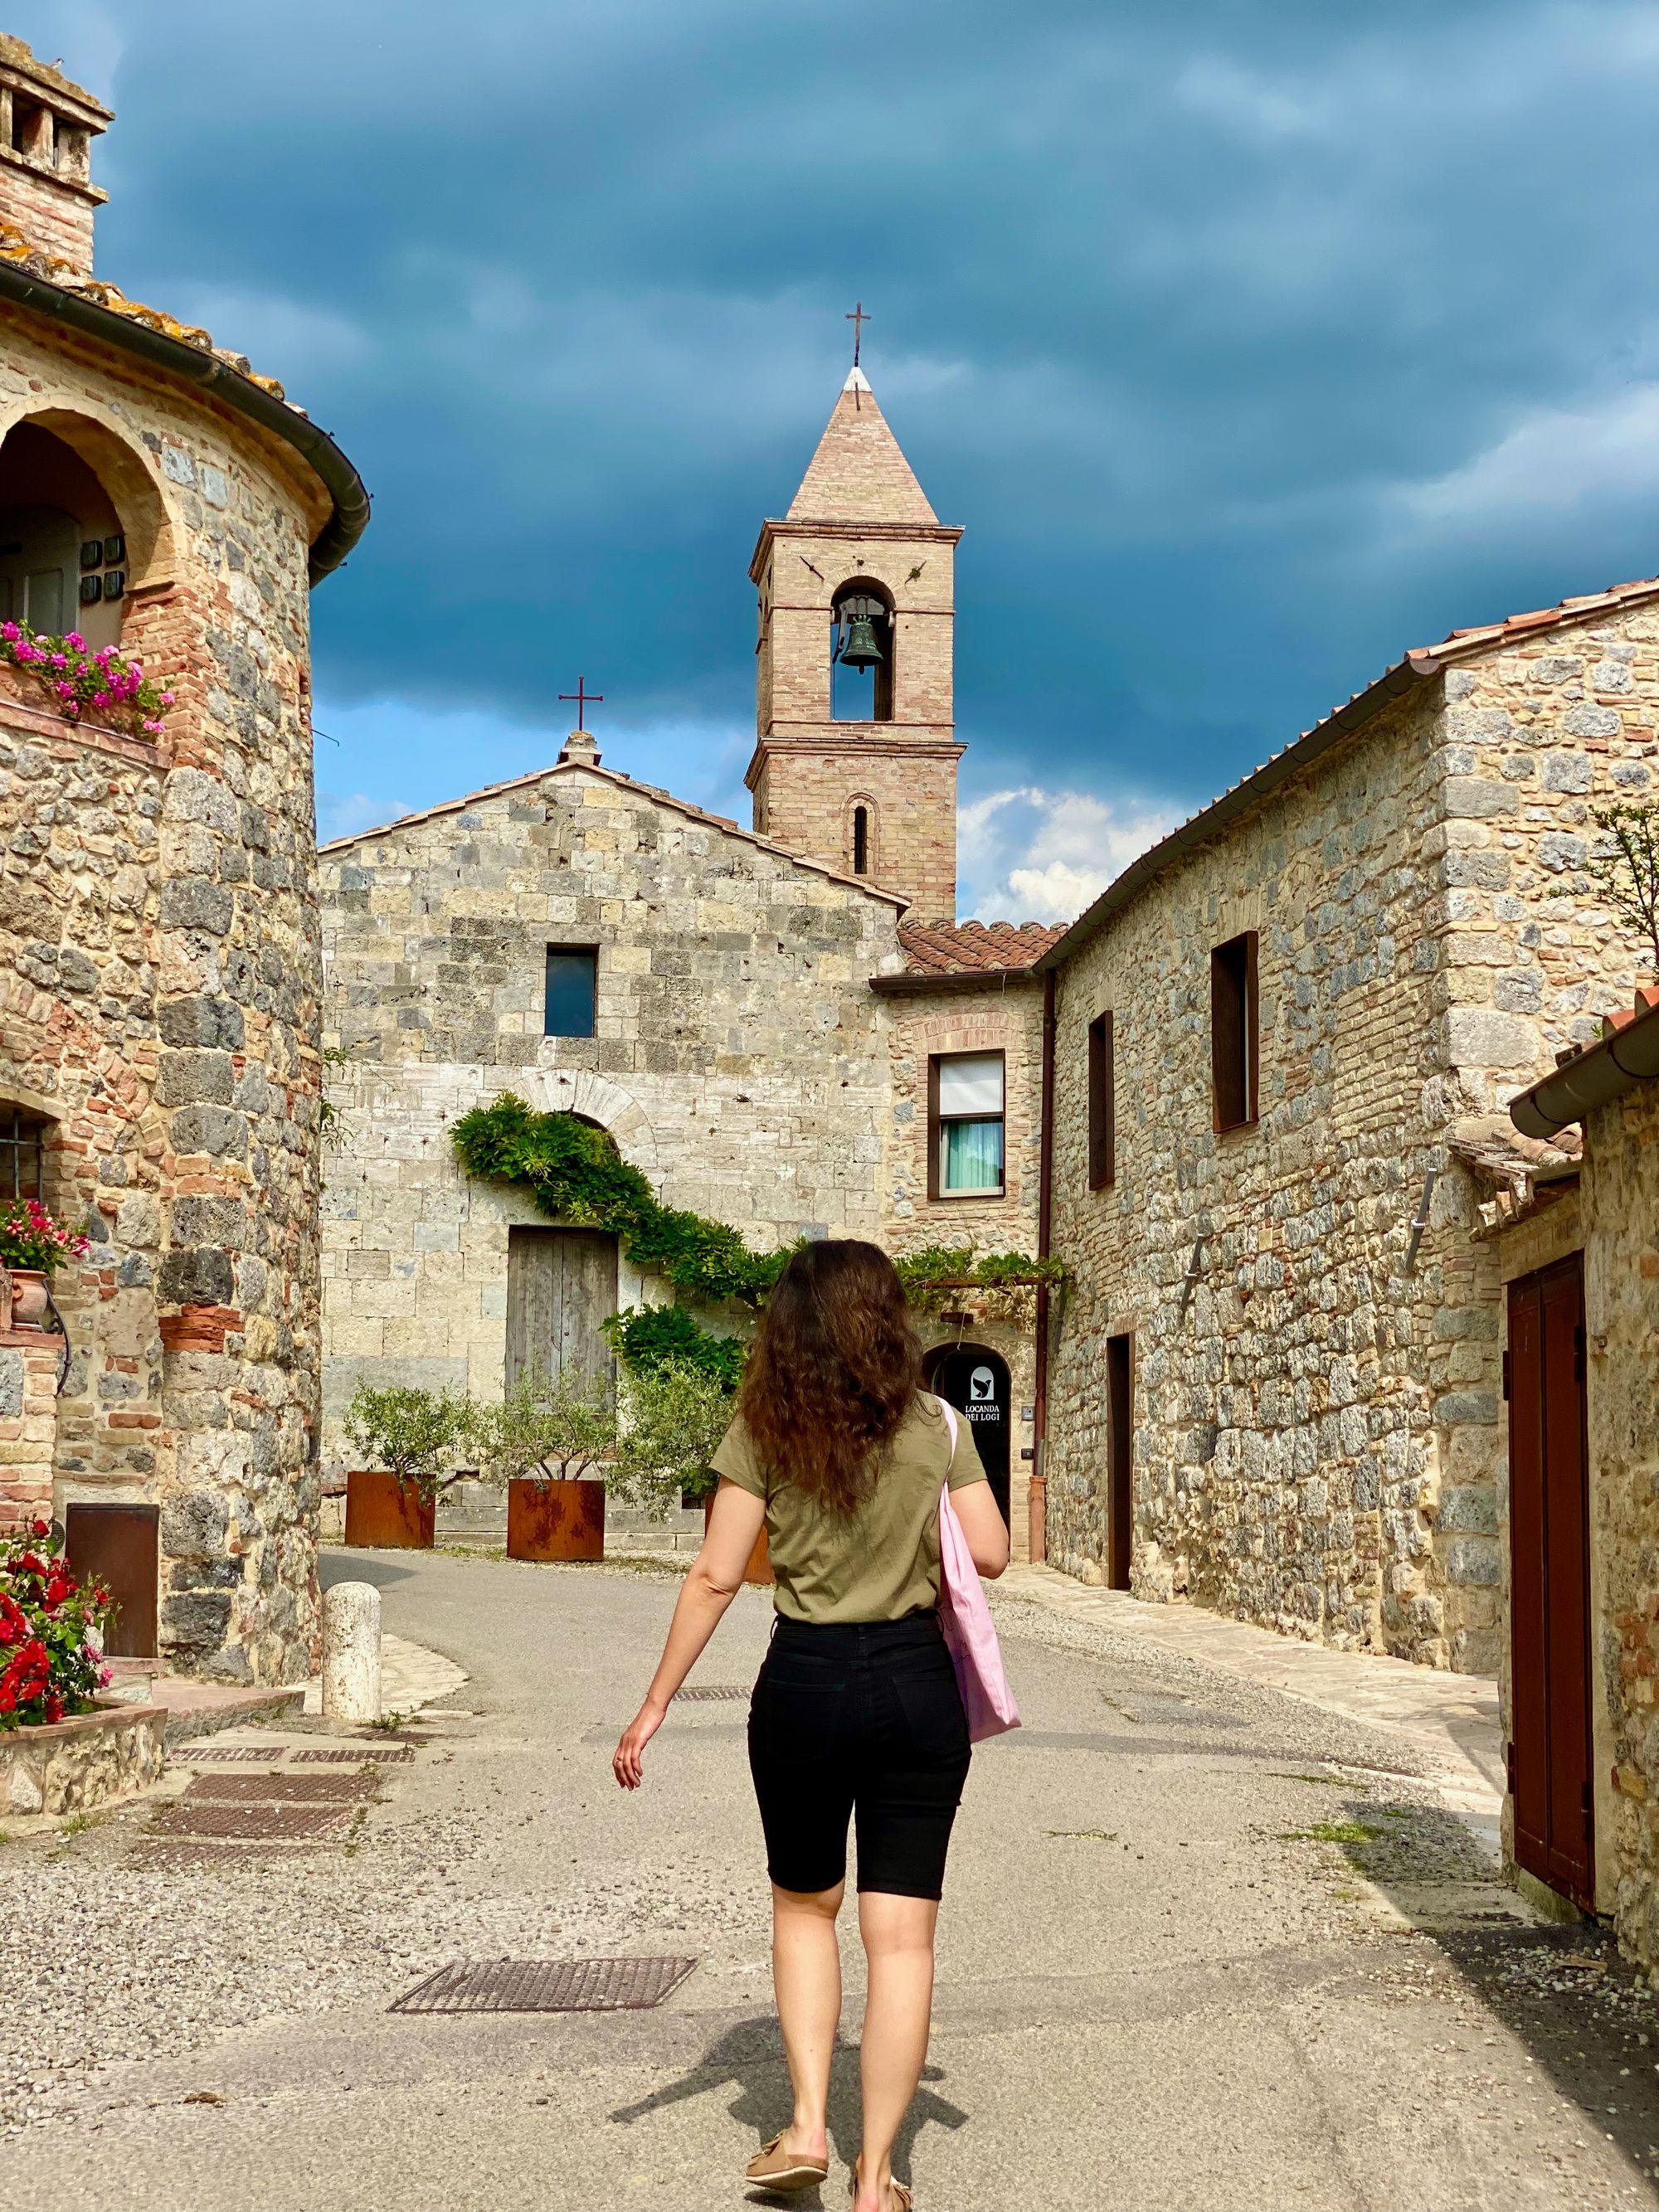 My wife in the small hamlet of San Donato